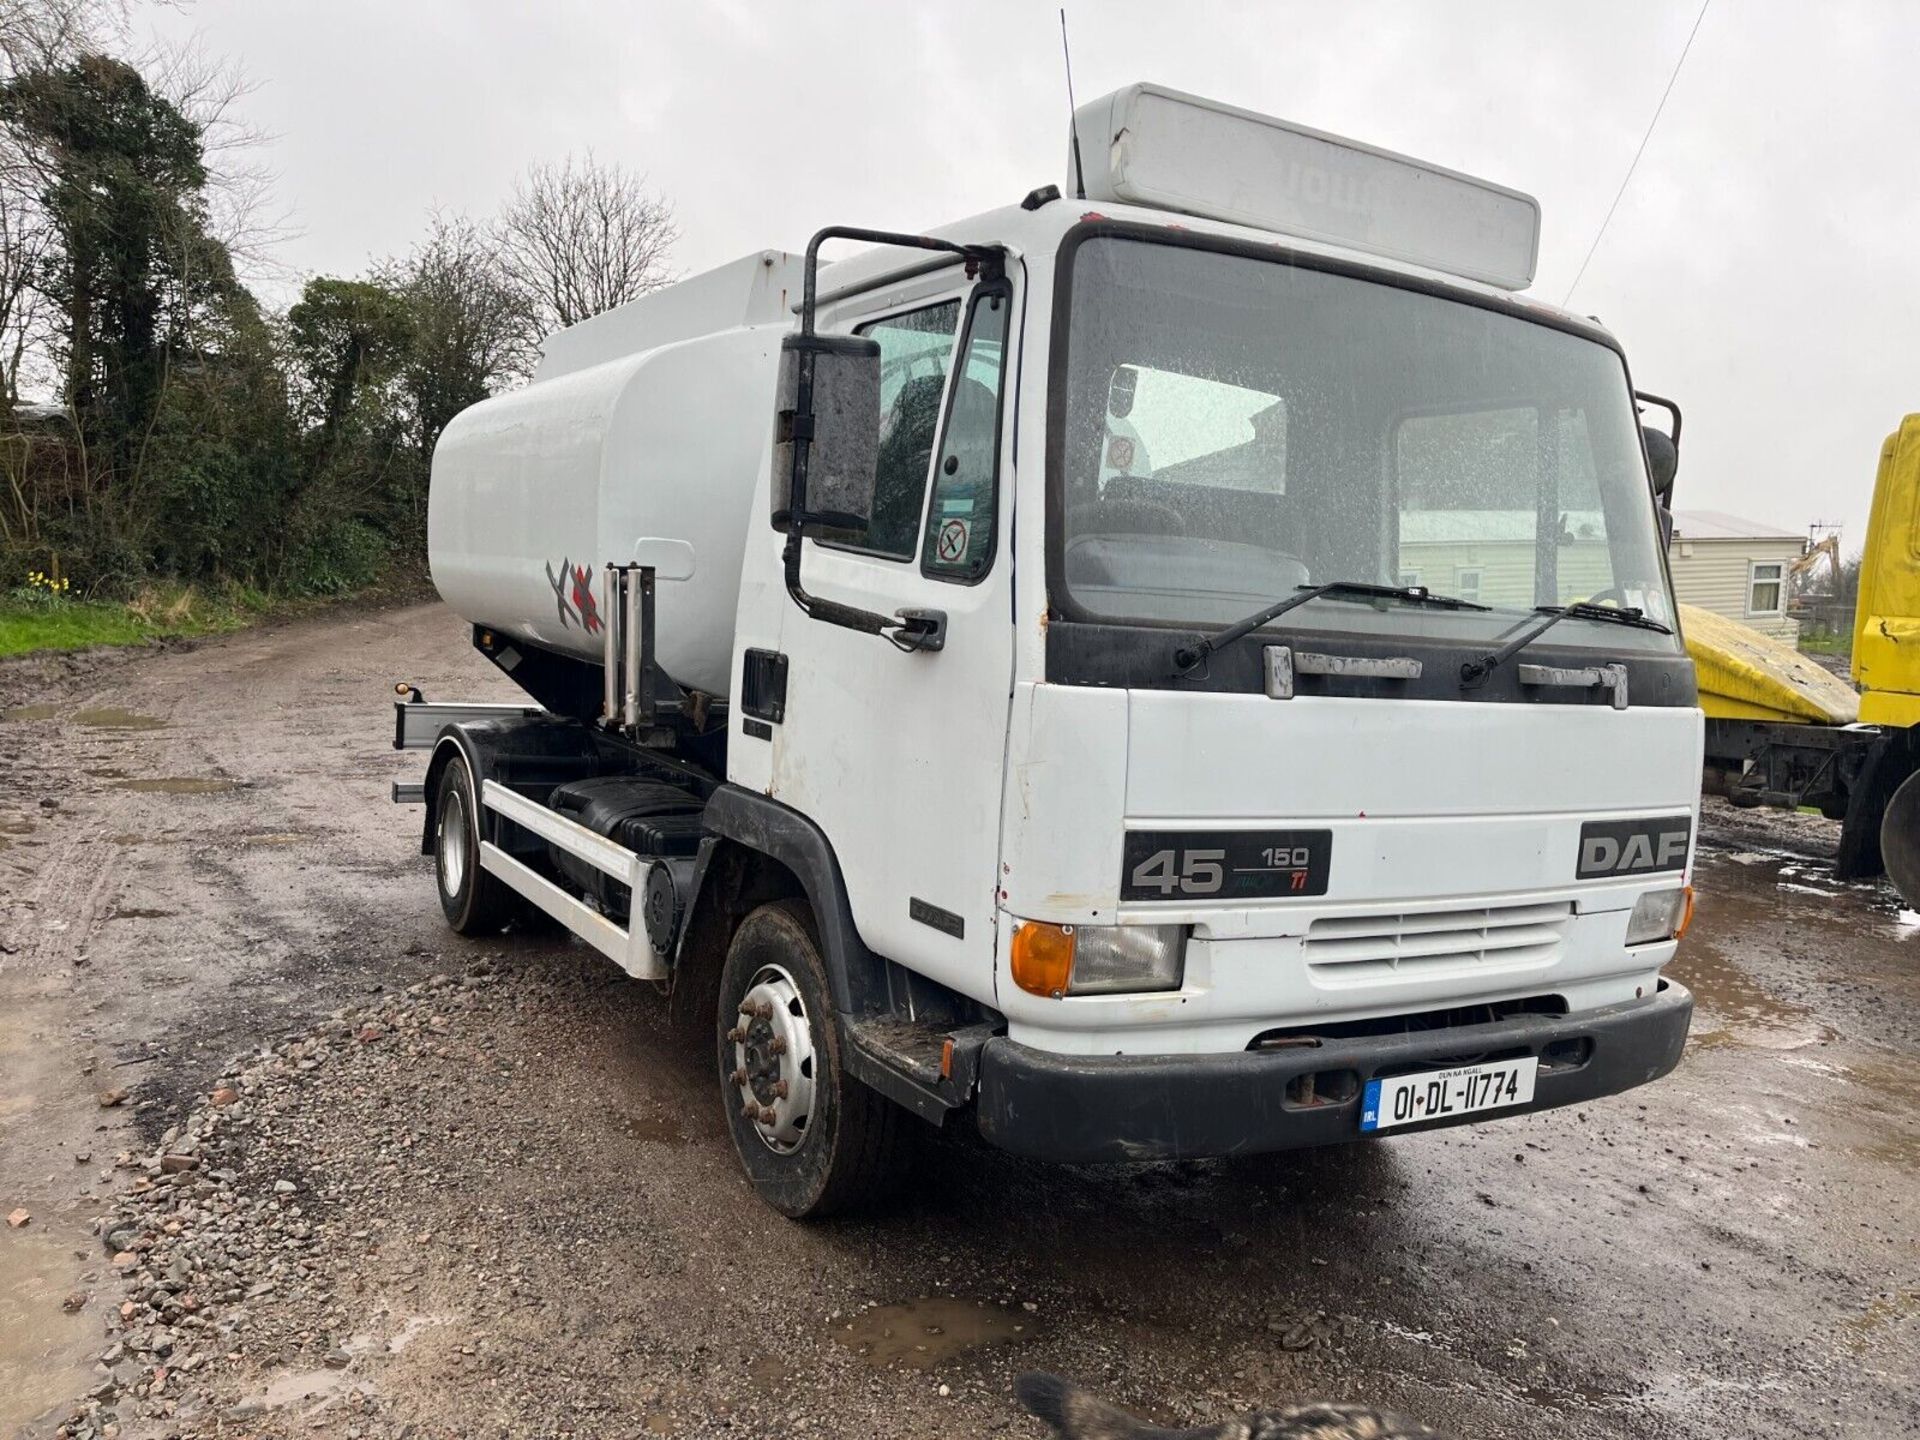 STURDY AND READY: LEYLAND DAF FA45.150 TANKER, 8 STUD AXLES - Image 2 of 21